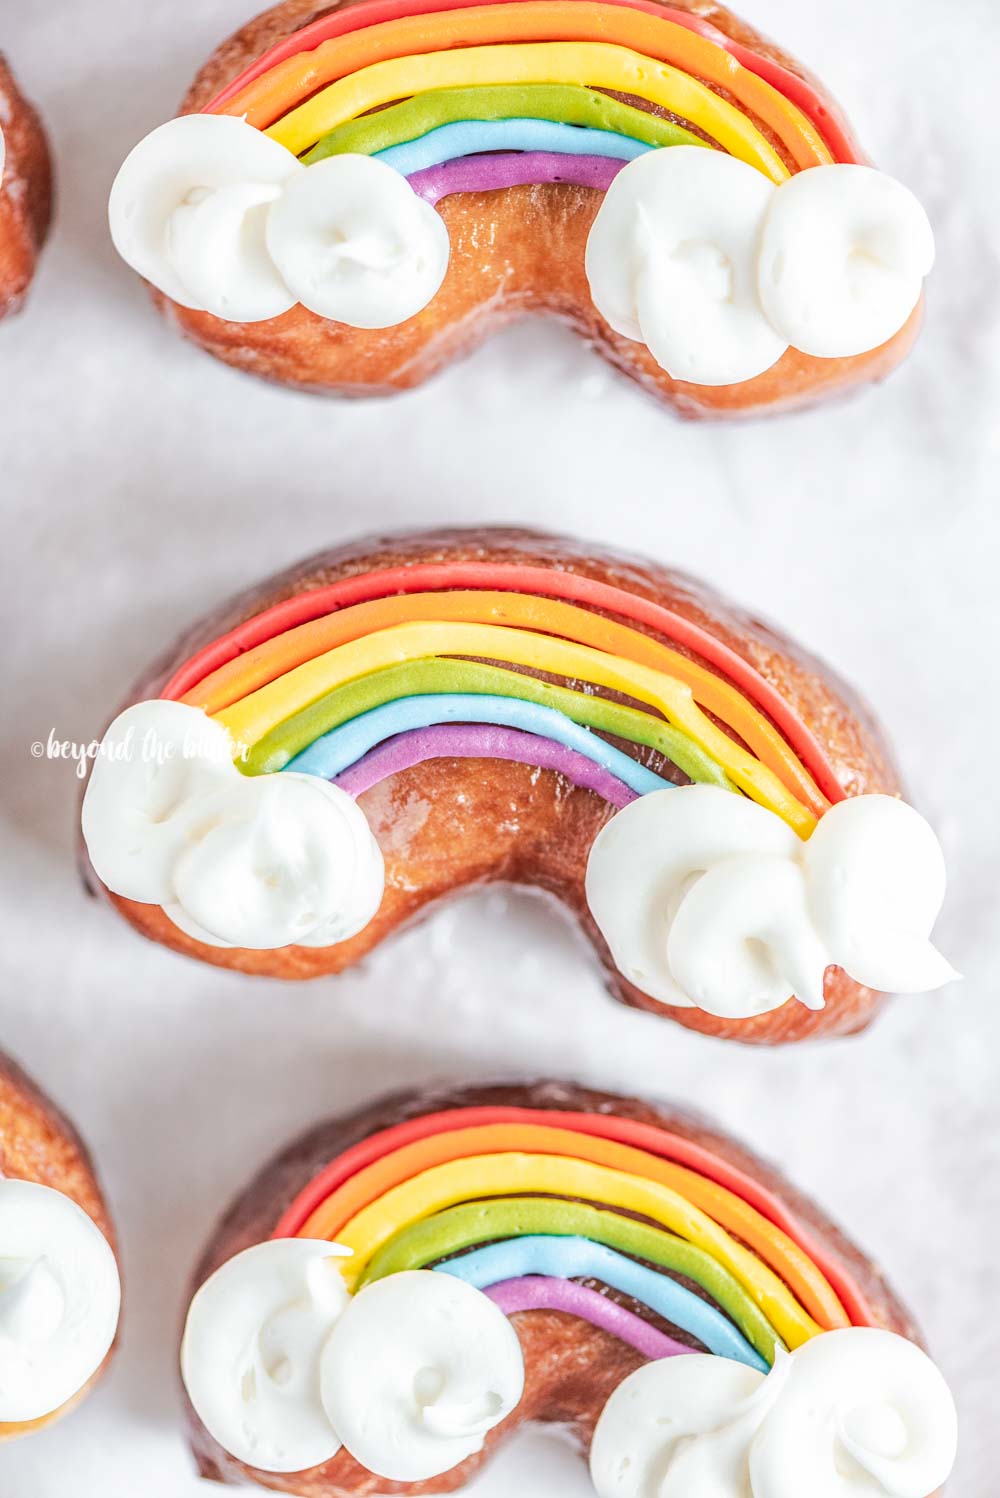 Overhead closeup image of homemade Rainbow Donuts | All Images © Beyond the Butter, LLC